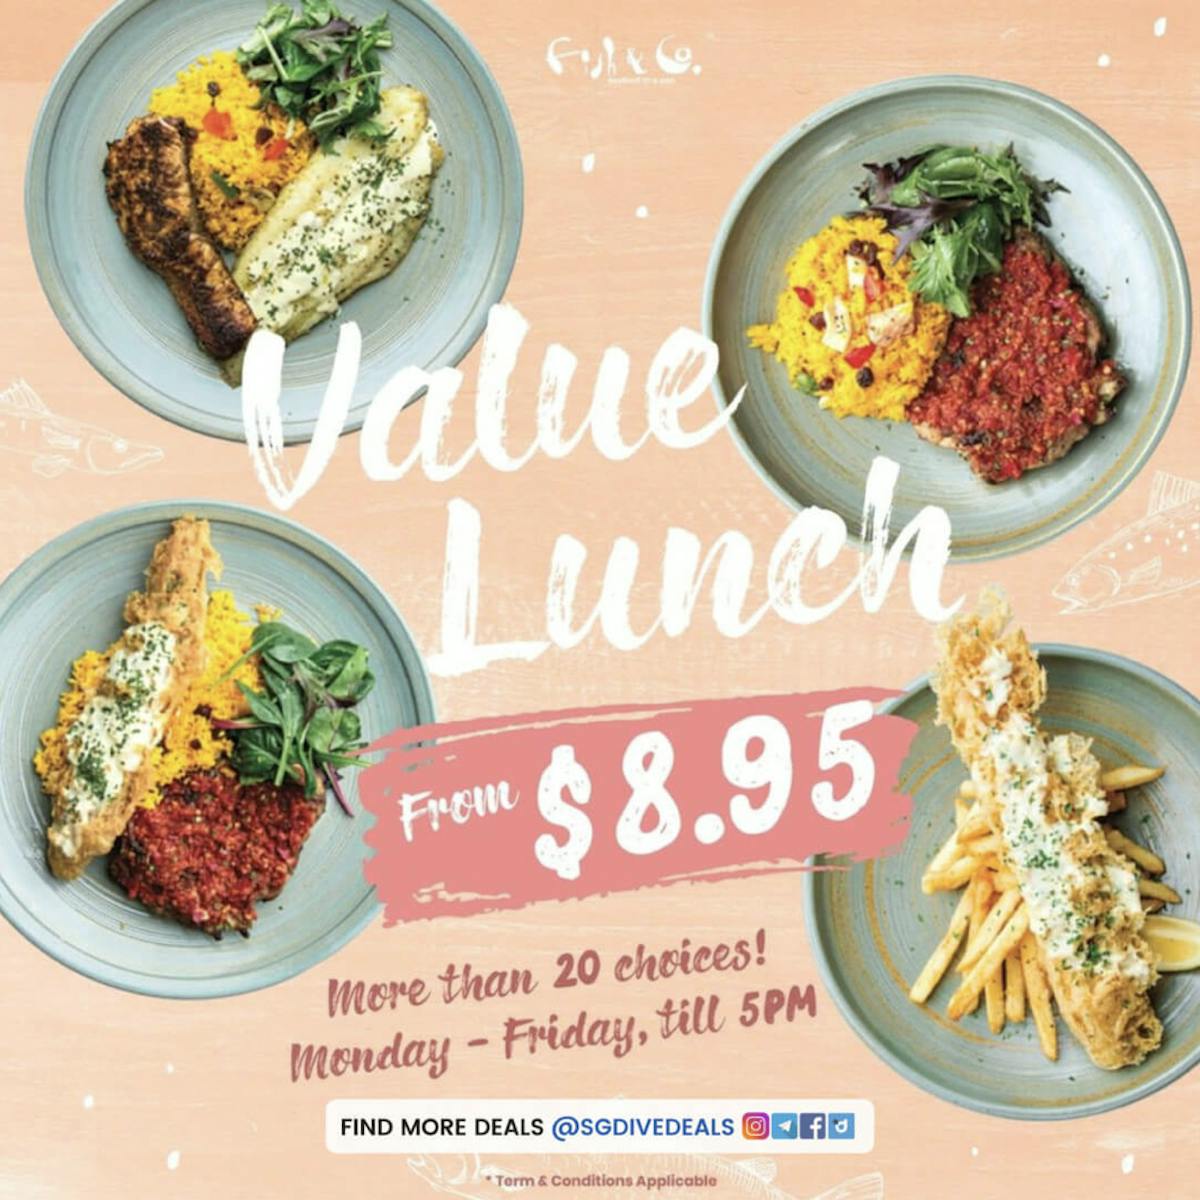 $8.95 Value Lunch Meal